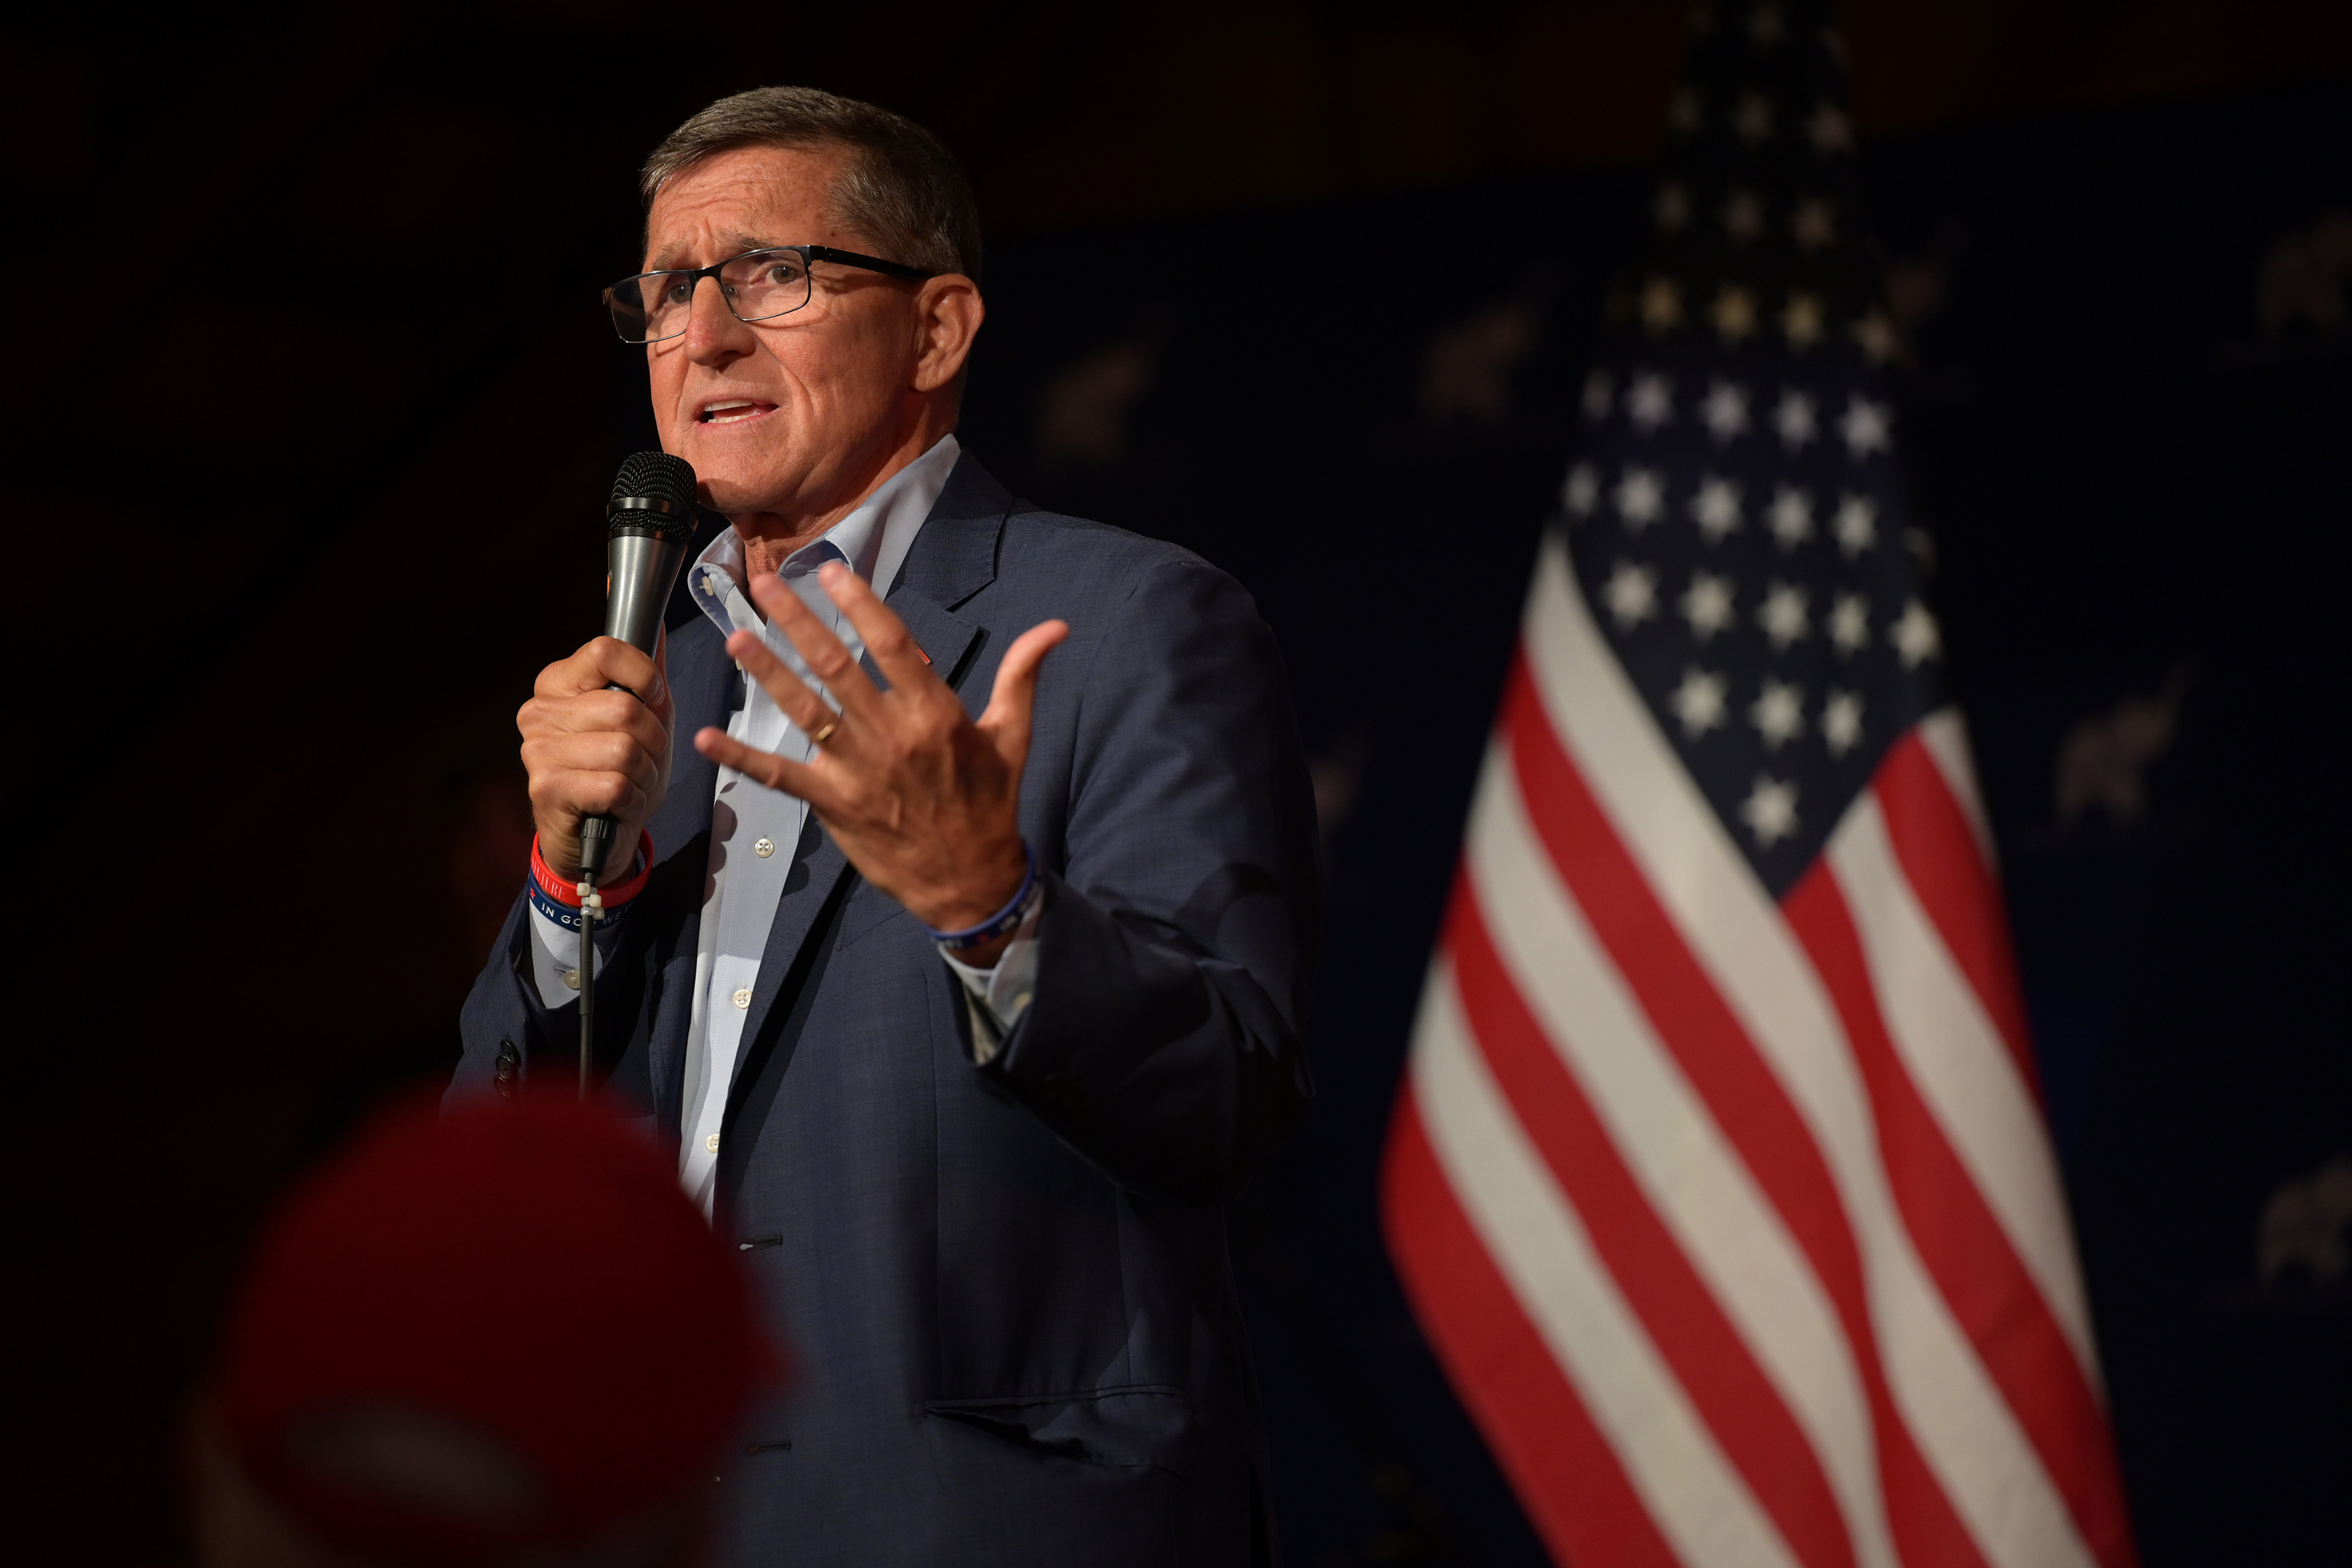 Michael Flynn, former President Donald Trump’s national security advisor, speaks at a campaign event on April 21, in Brunswick, Ohio.